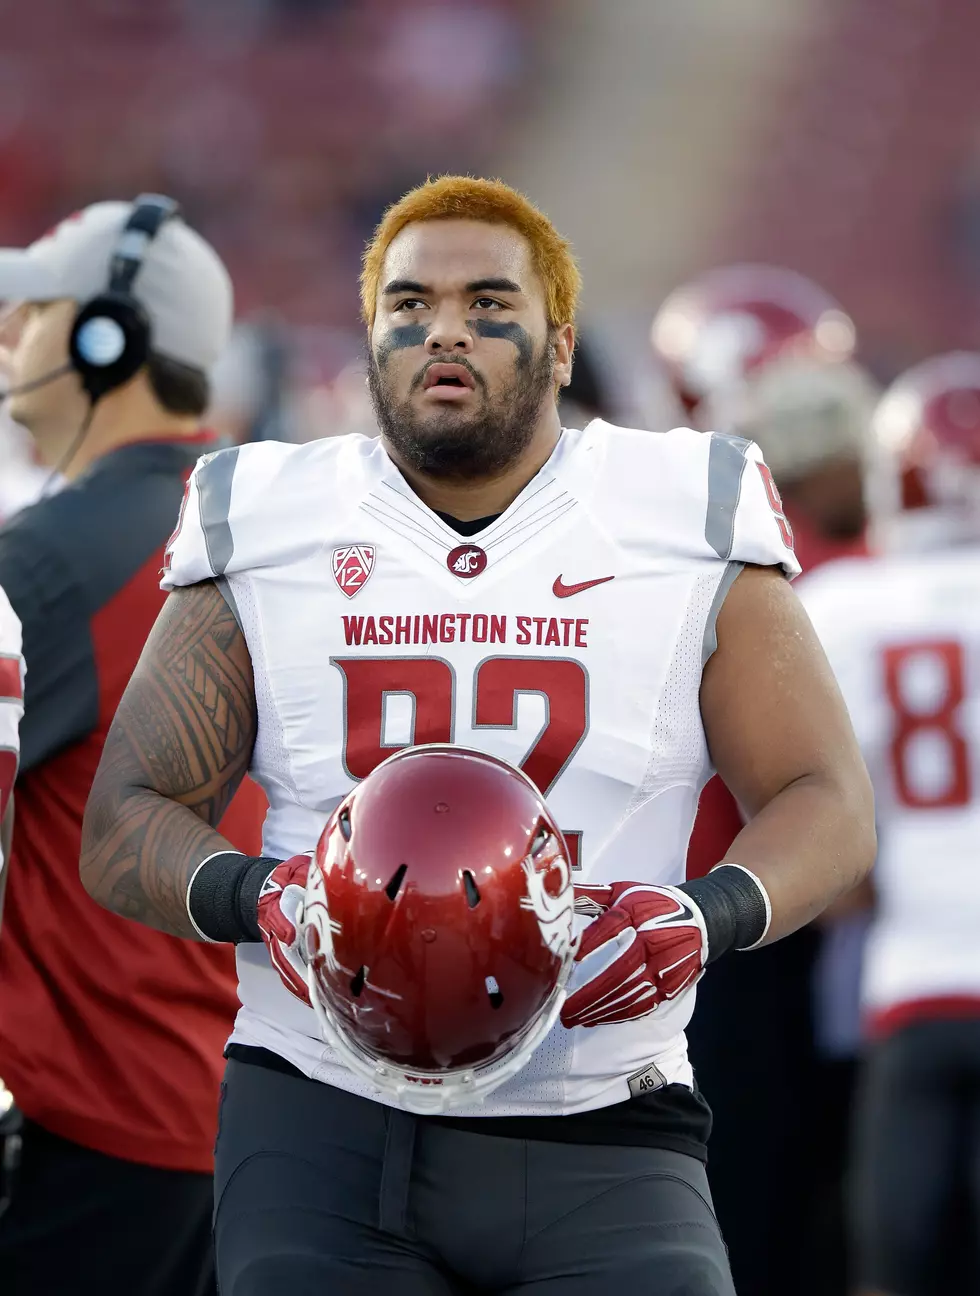 Former Washington State football player Found Not Guilty